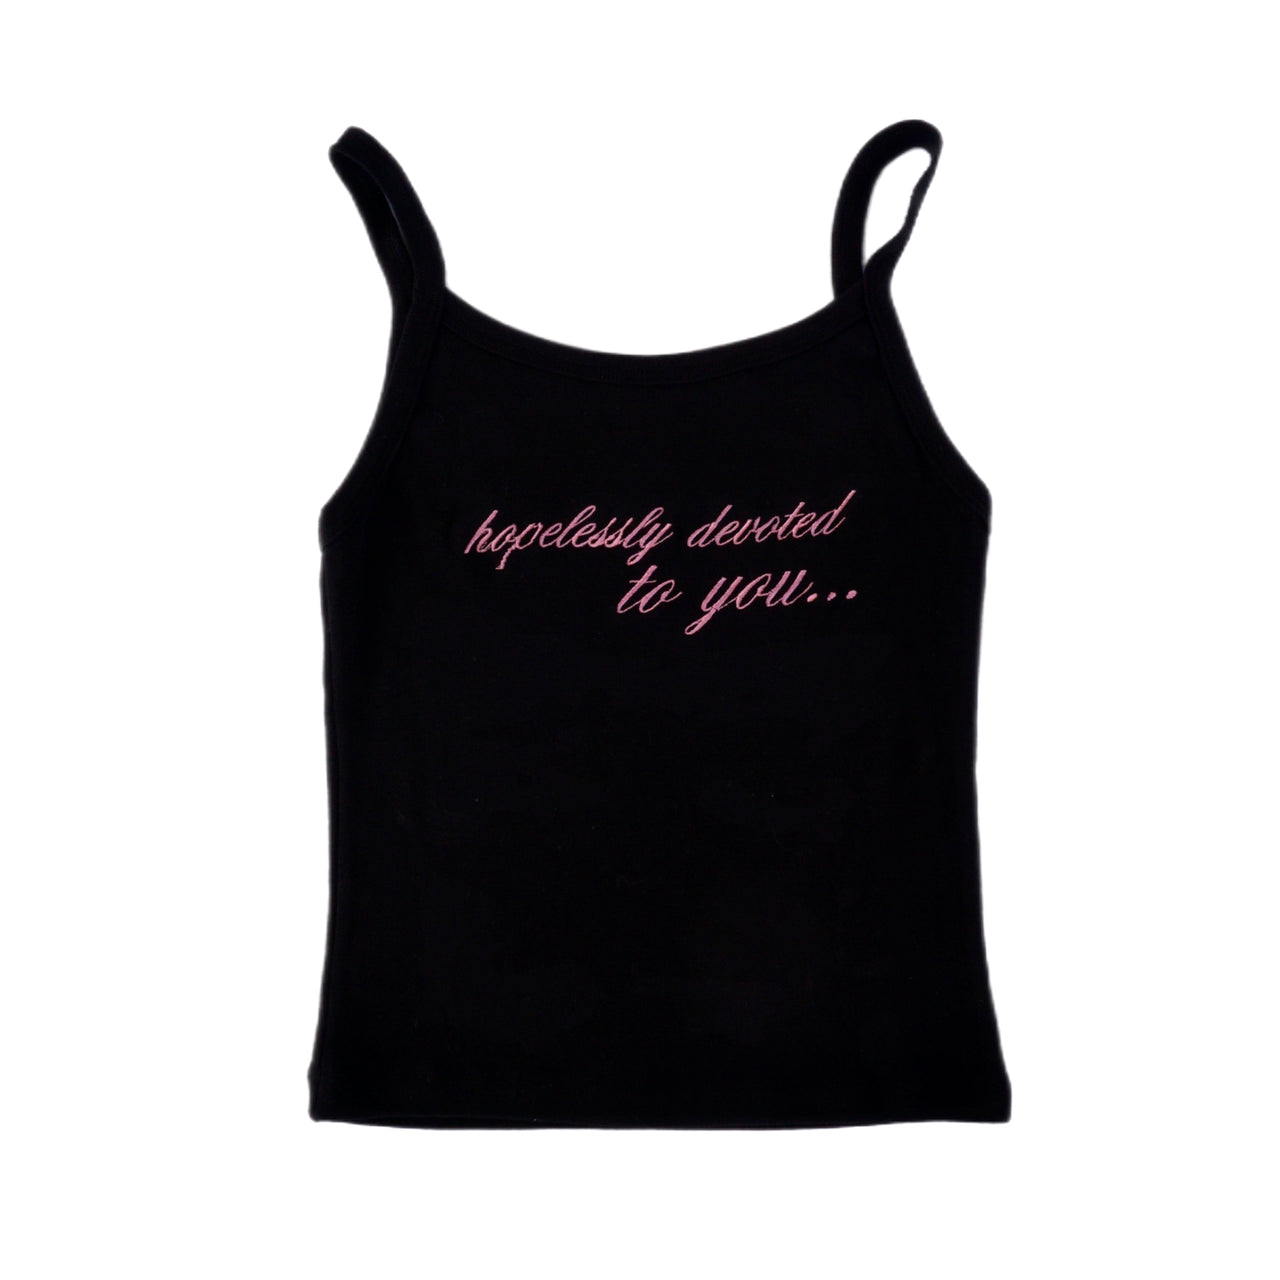 Hopelessly devoted to you tank